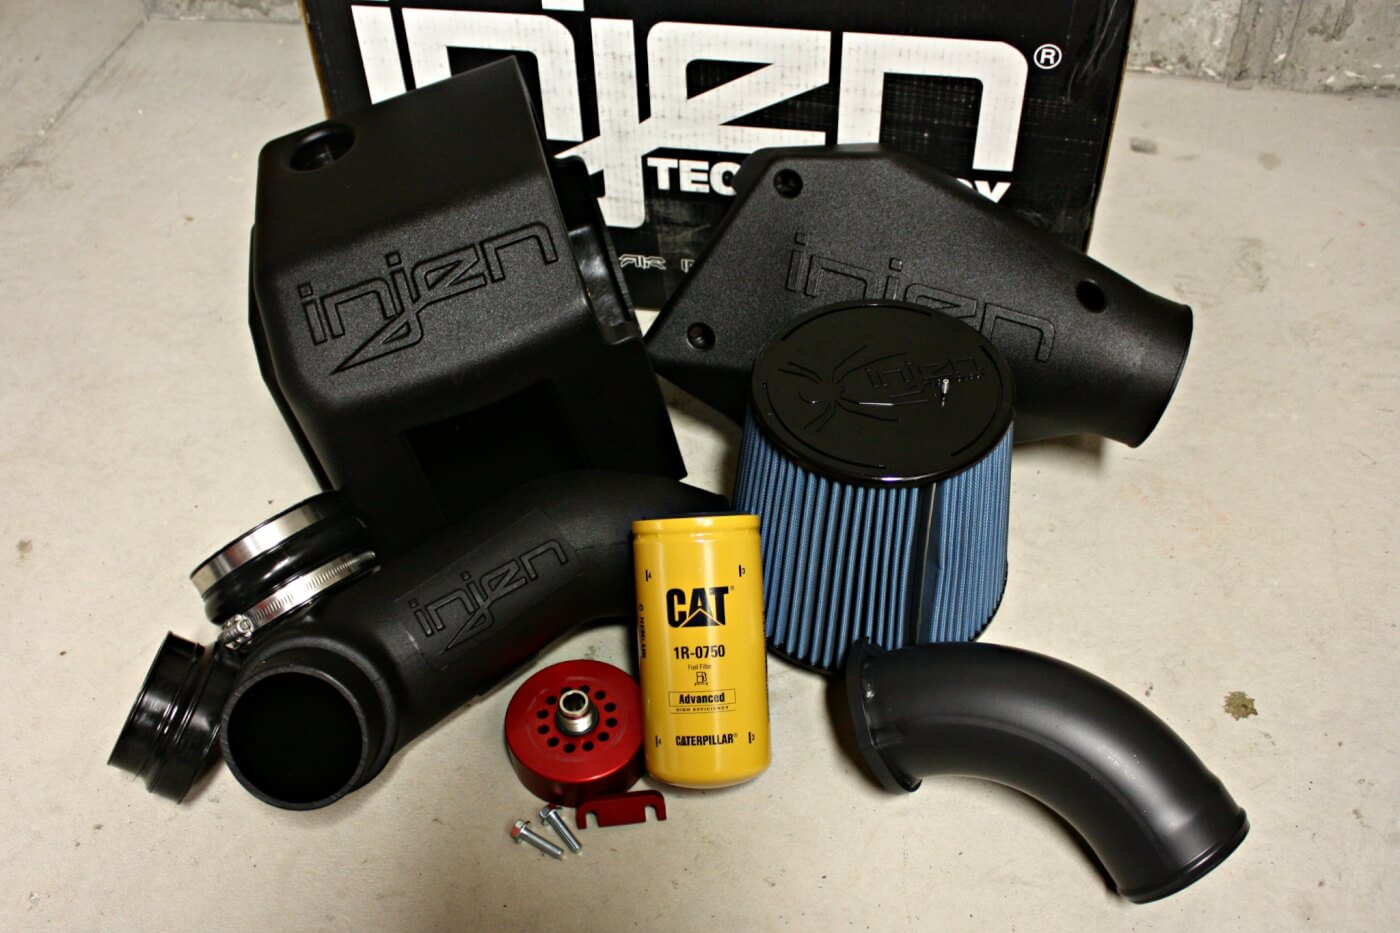 The new line of Evolution air induction systems from Injen Technology offer a plastic injection-molded sealed box and high flow for incredible fit and function. When paired with the Deviant Race Parts High-Flow Turbo Intake Horn (lower right) it will offer better filtration with improved flow. The Deviant Cat Fuel Filter Adaptor will also be installed to replace the factory-style fuel filter to reduce future maintenance costs while improving filtration before the CP3 and injectors.